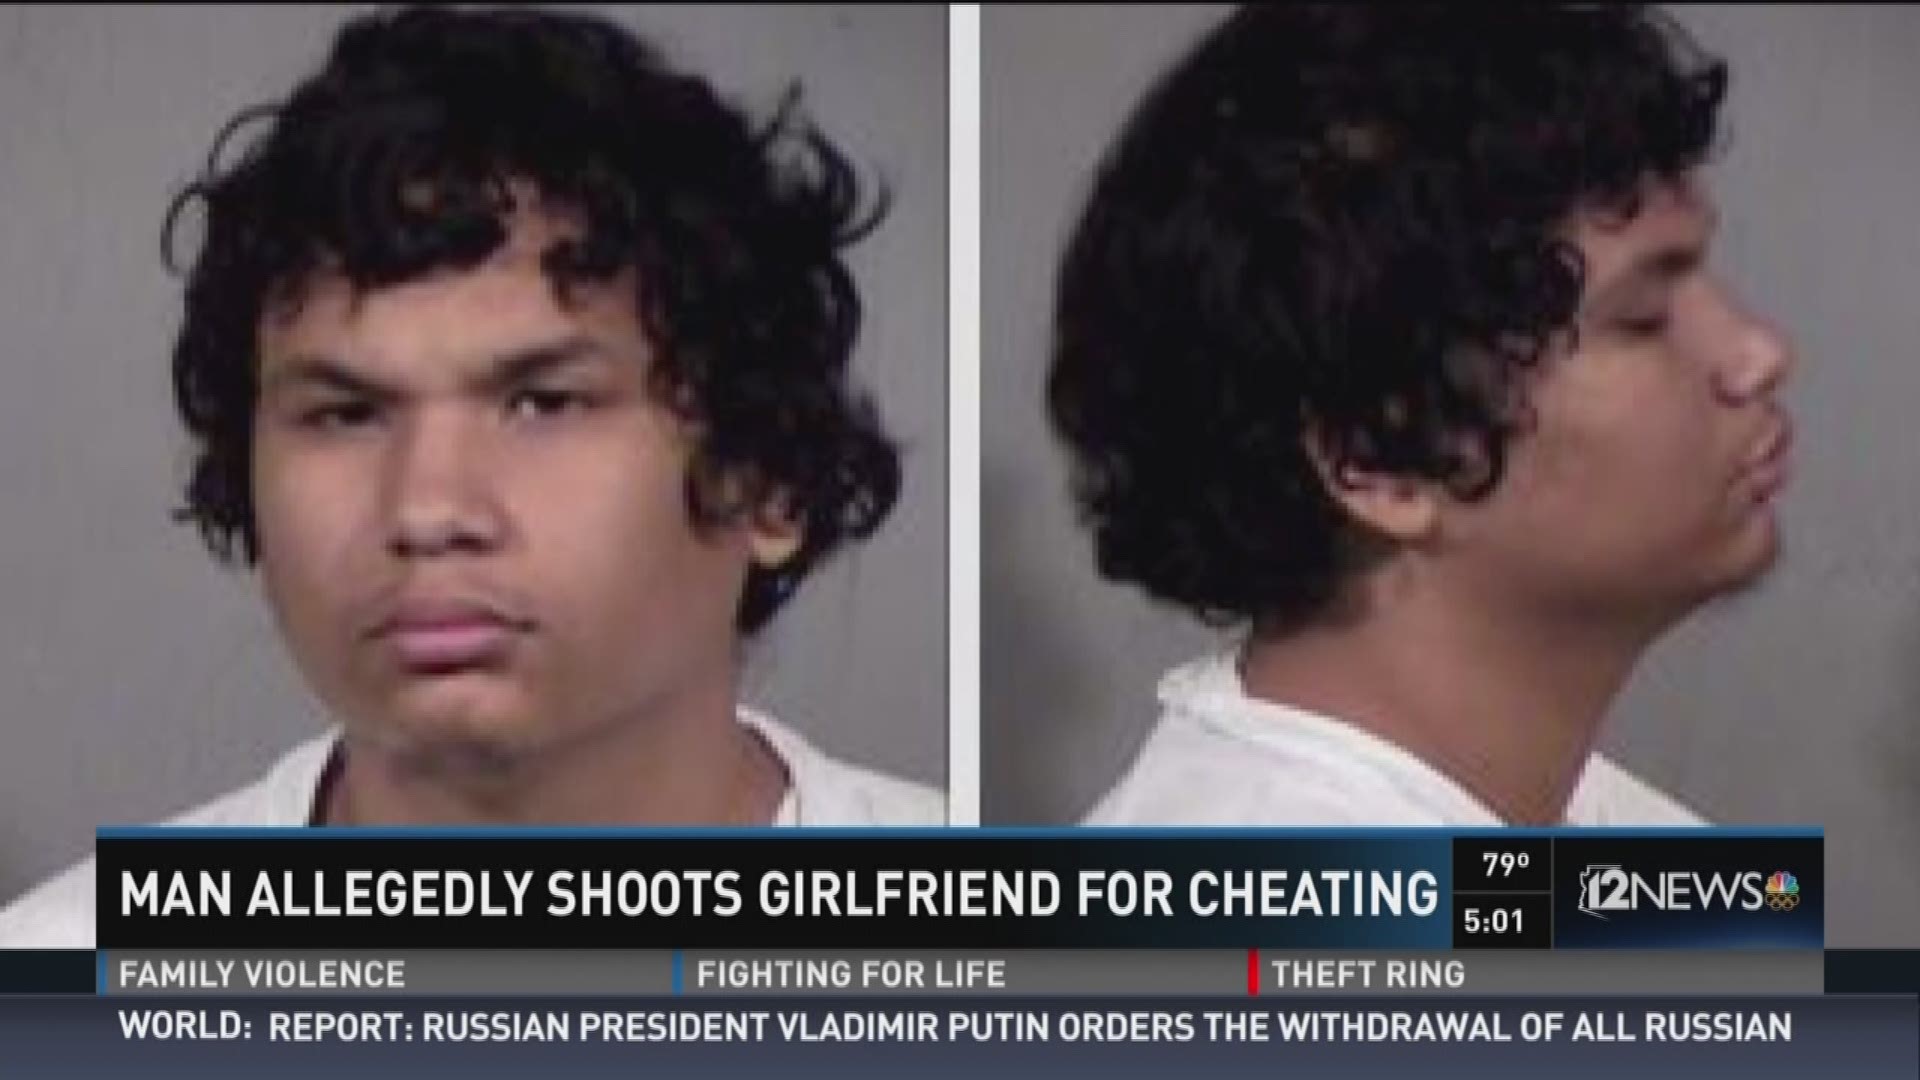 Man allegedly shoots girlfriend for cheating 12news